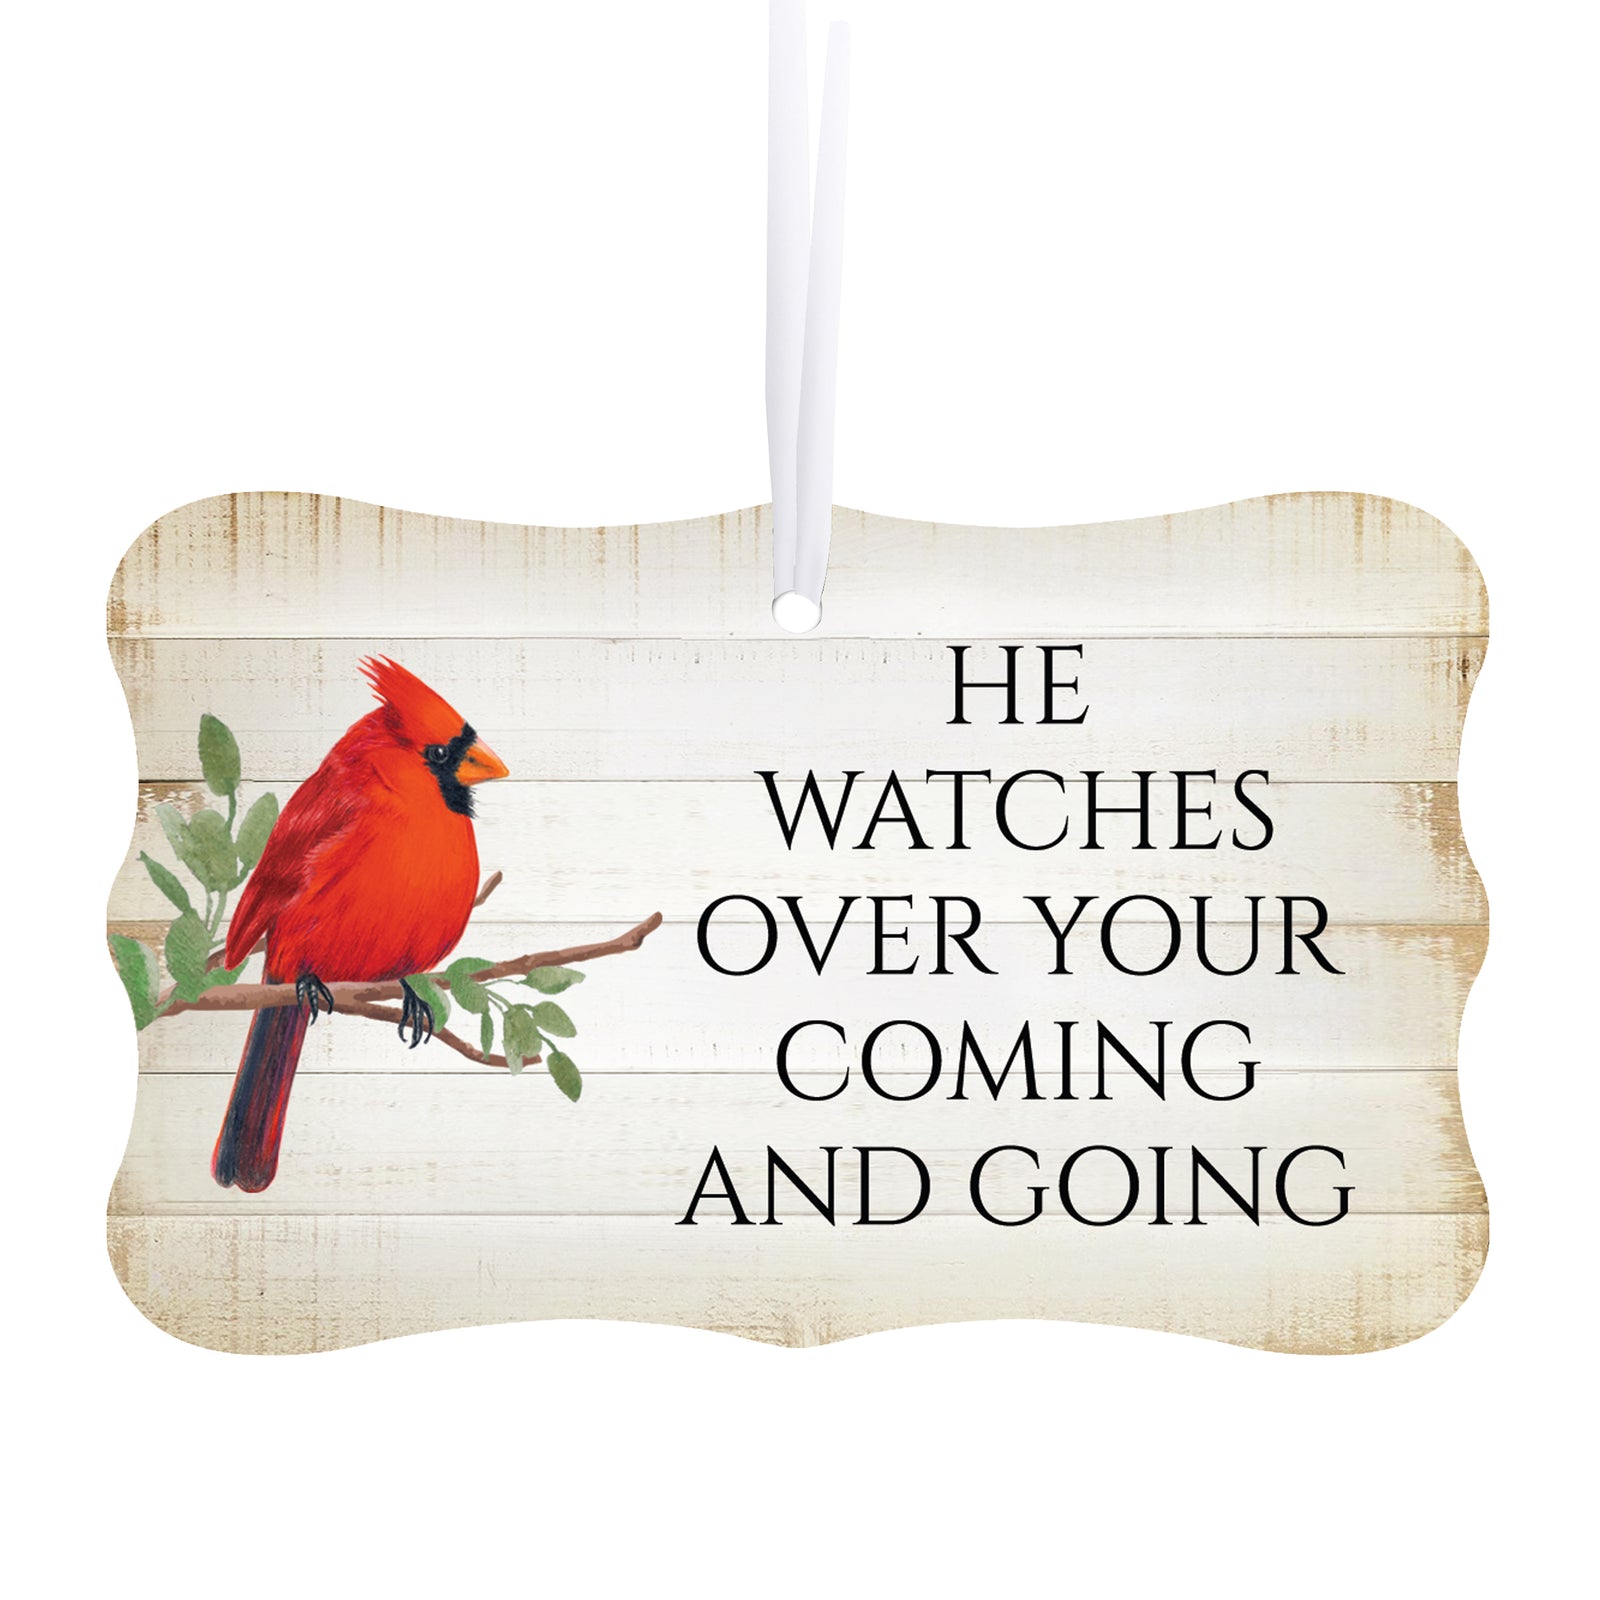 Rustic Scalloped Cardinal Wooden Ornament With Everyday Verses Gift Ideas - He Watches Over